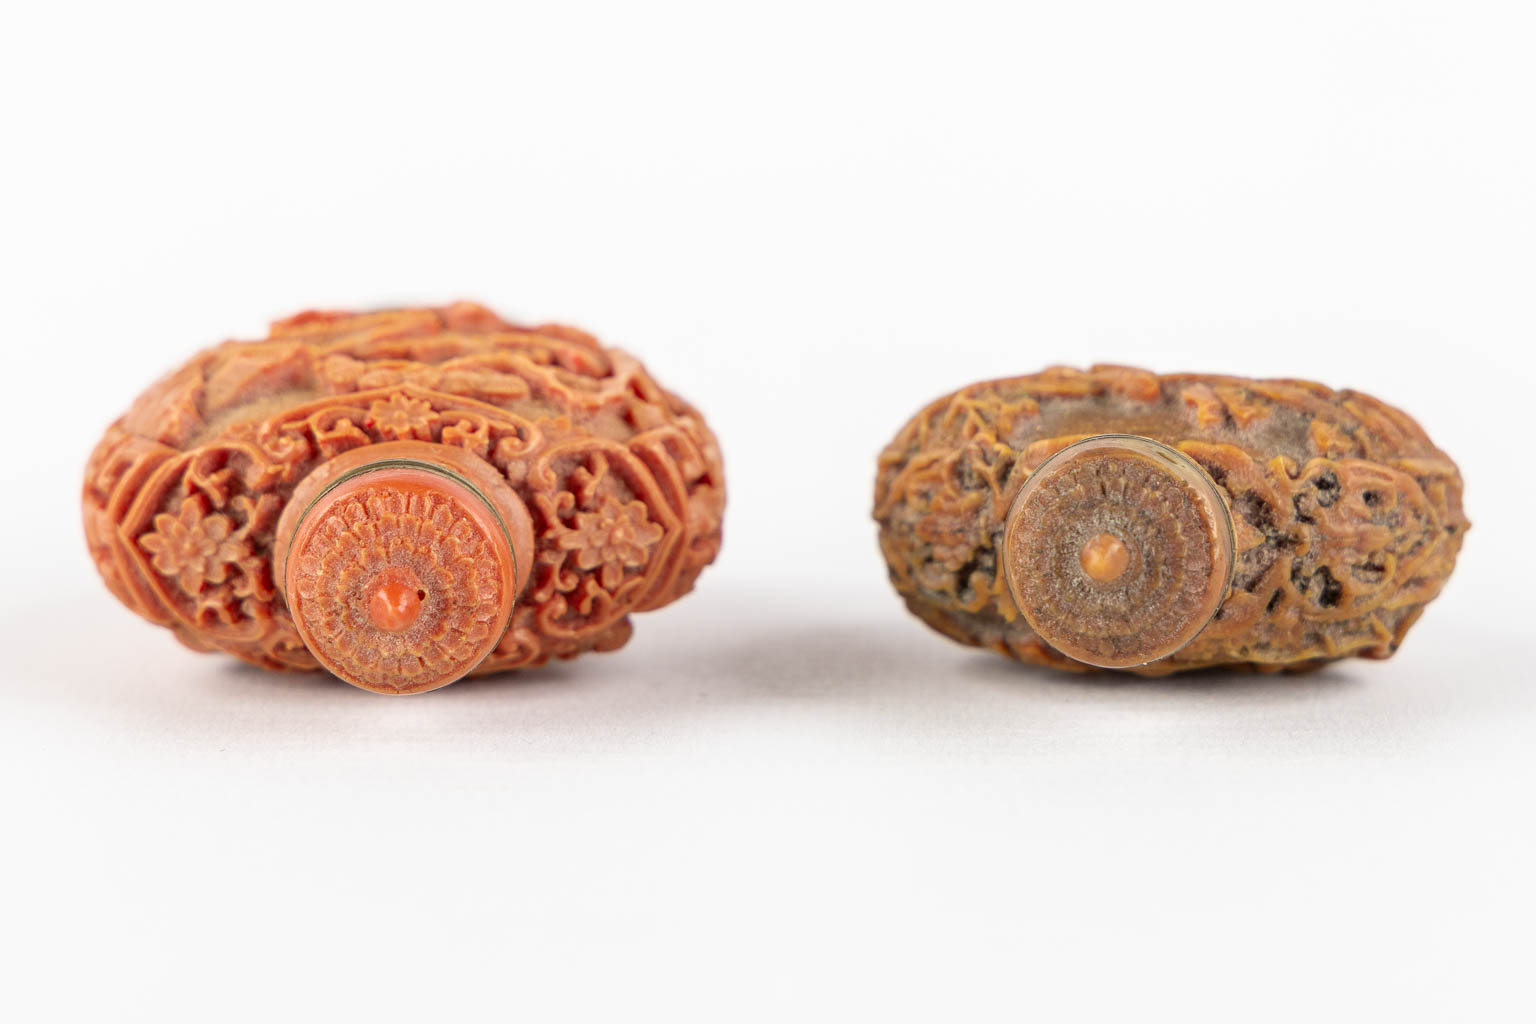 Two Snuff boxes, China, sculptured coral. Late Qing Dynasty. (H:7,2 cm)